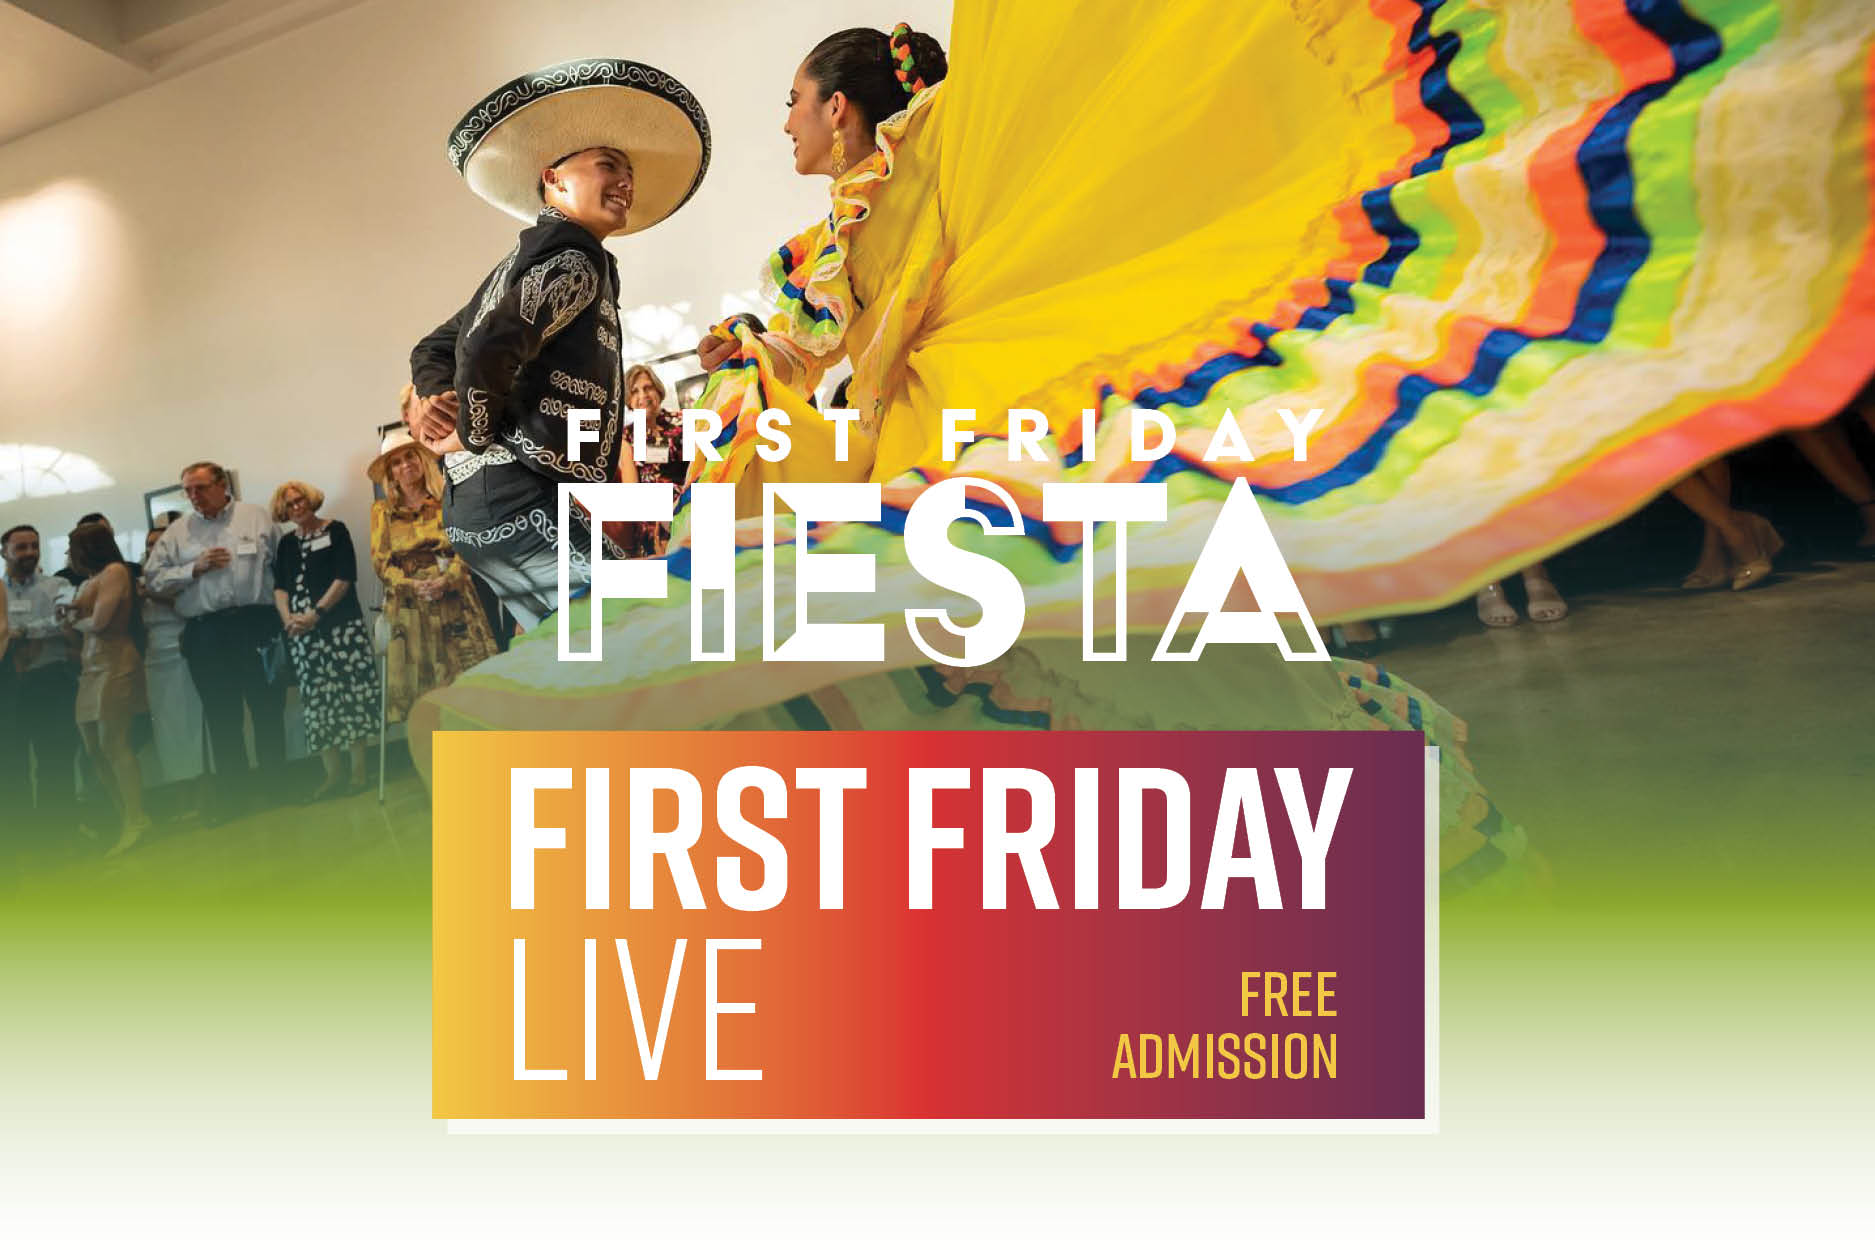 First Friday LIVE: First Friday Fiesta Poster Image